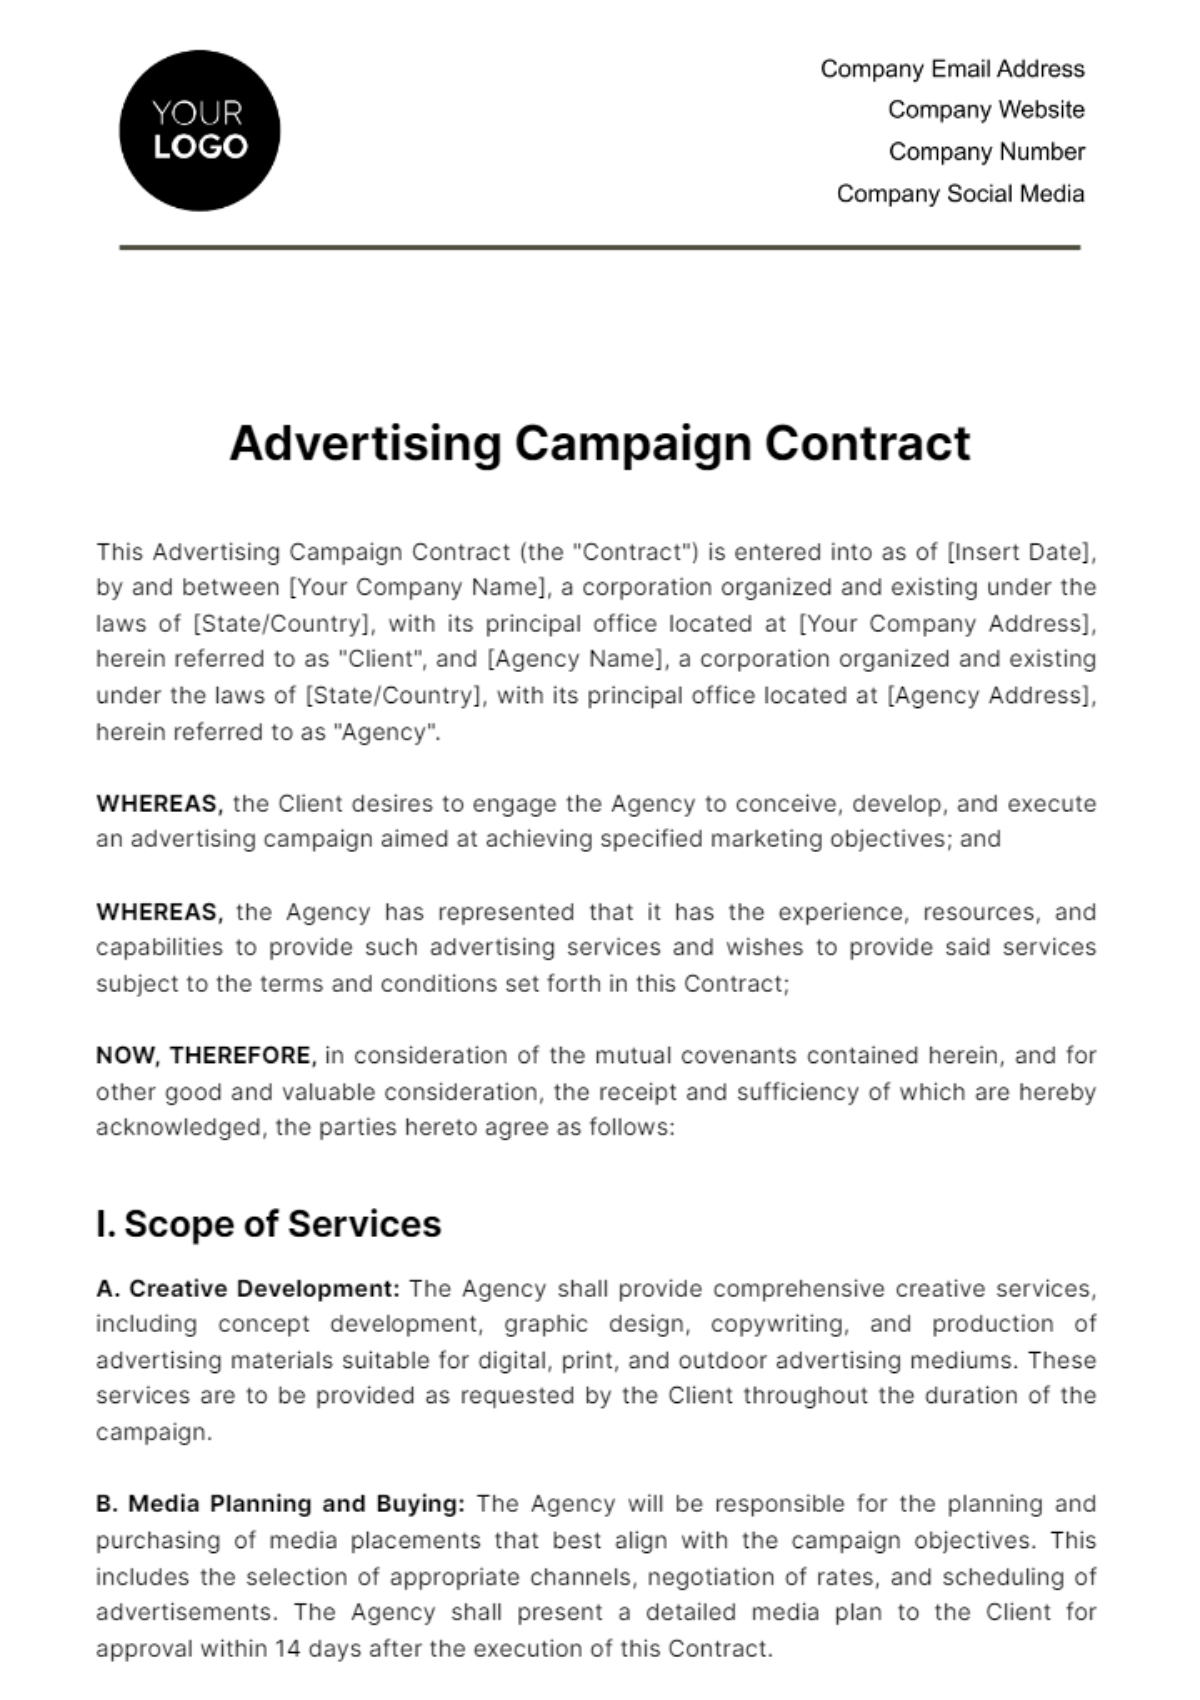 Advertising Campaign Contract Template